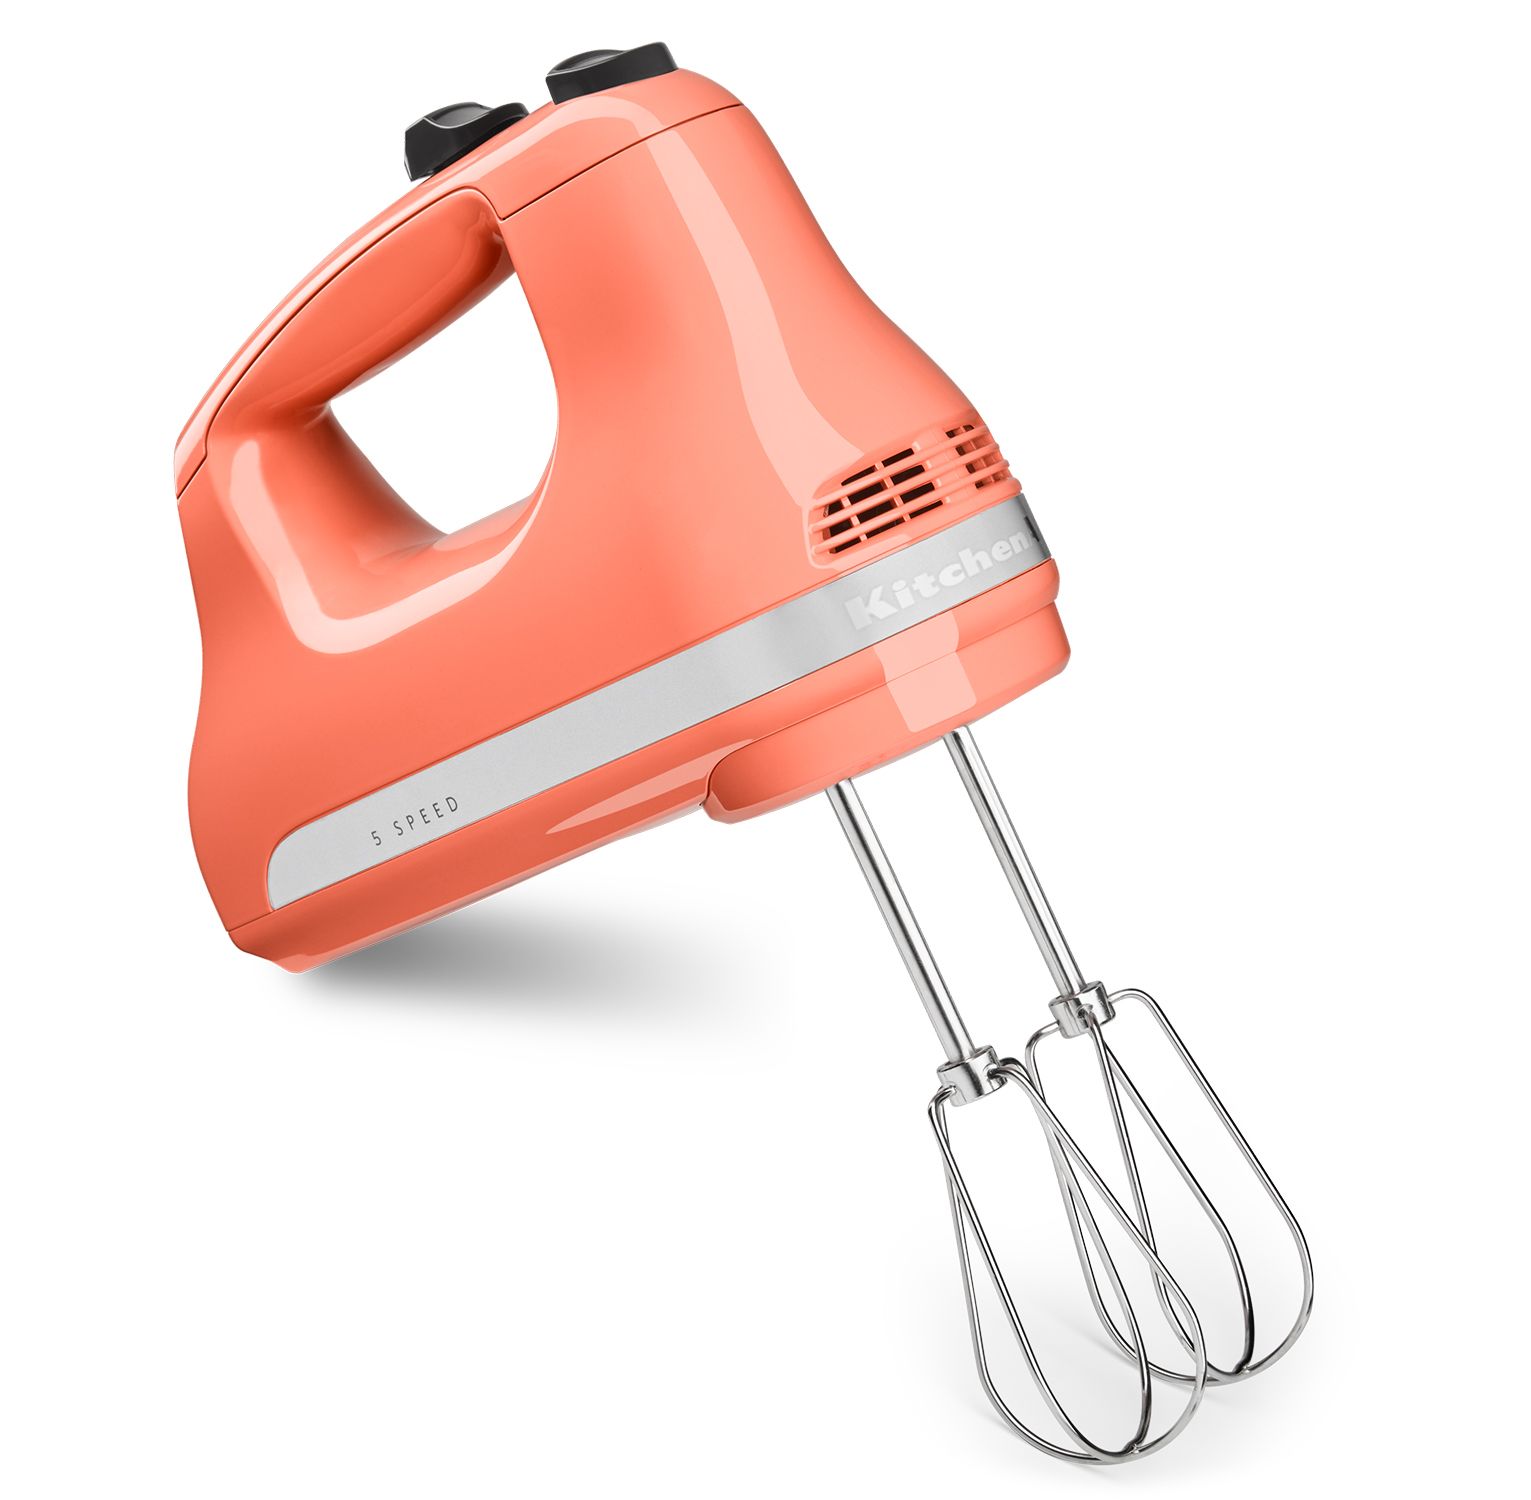 KitchenAid's First Color of The Year Is The Tropical Version of